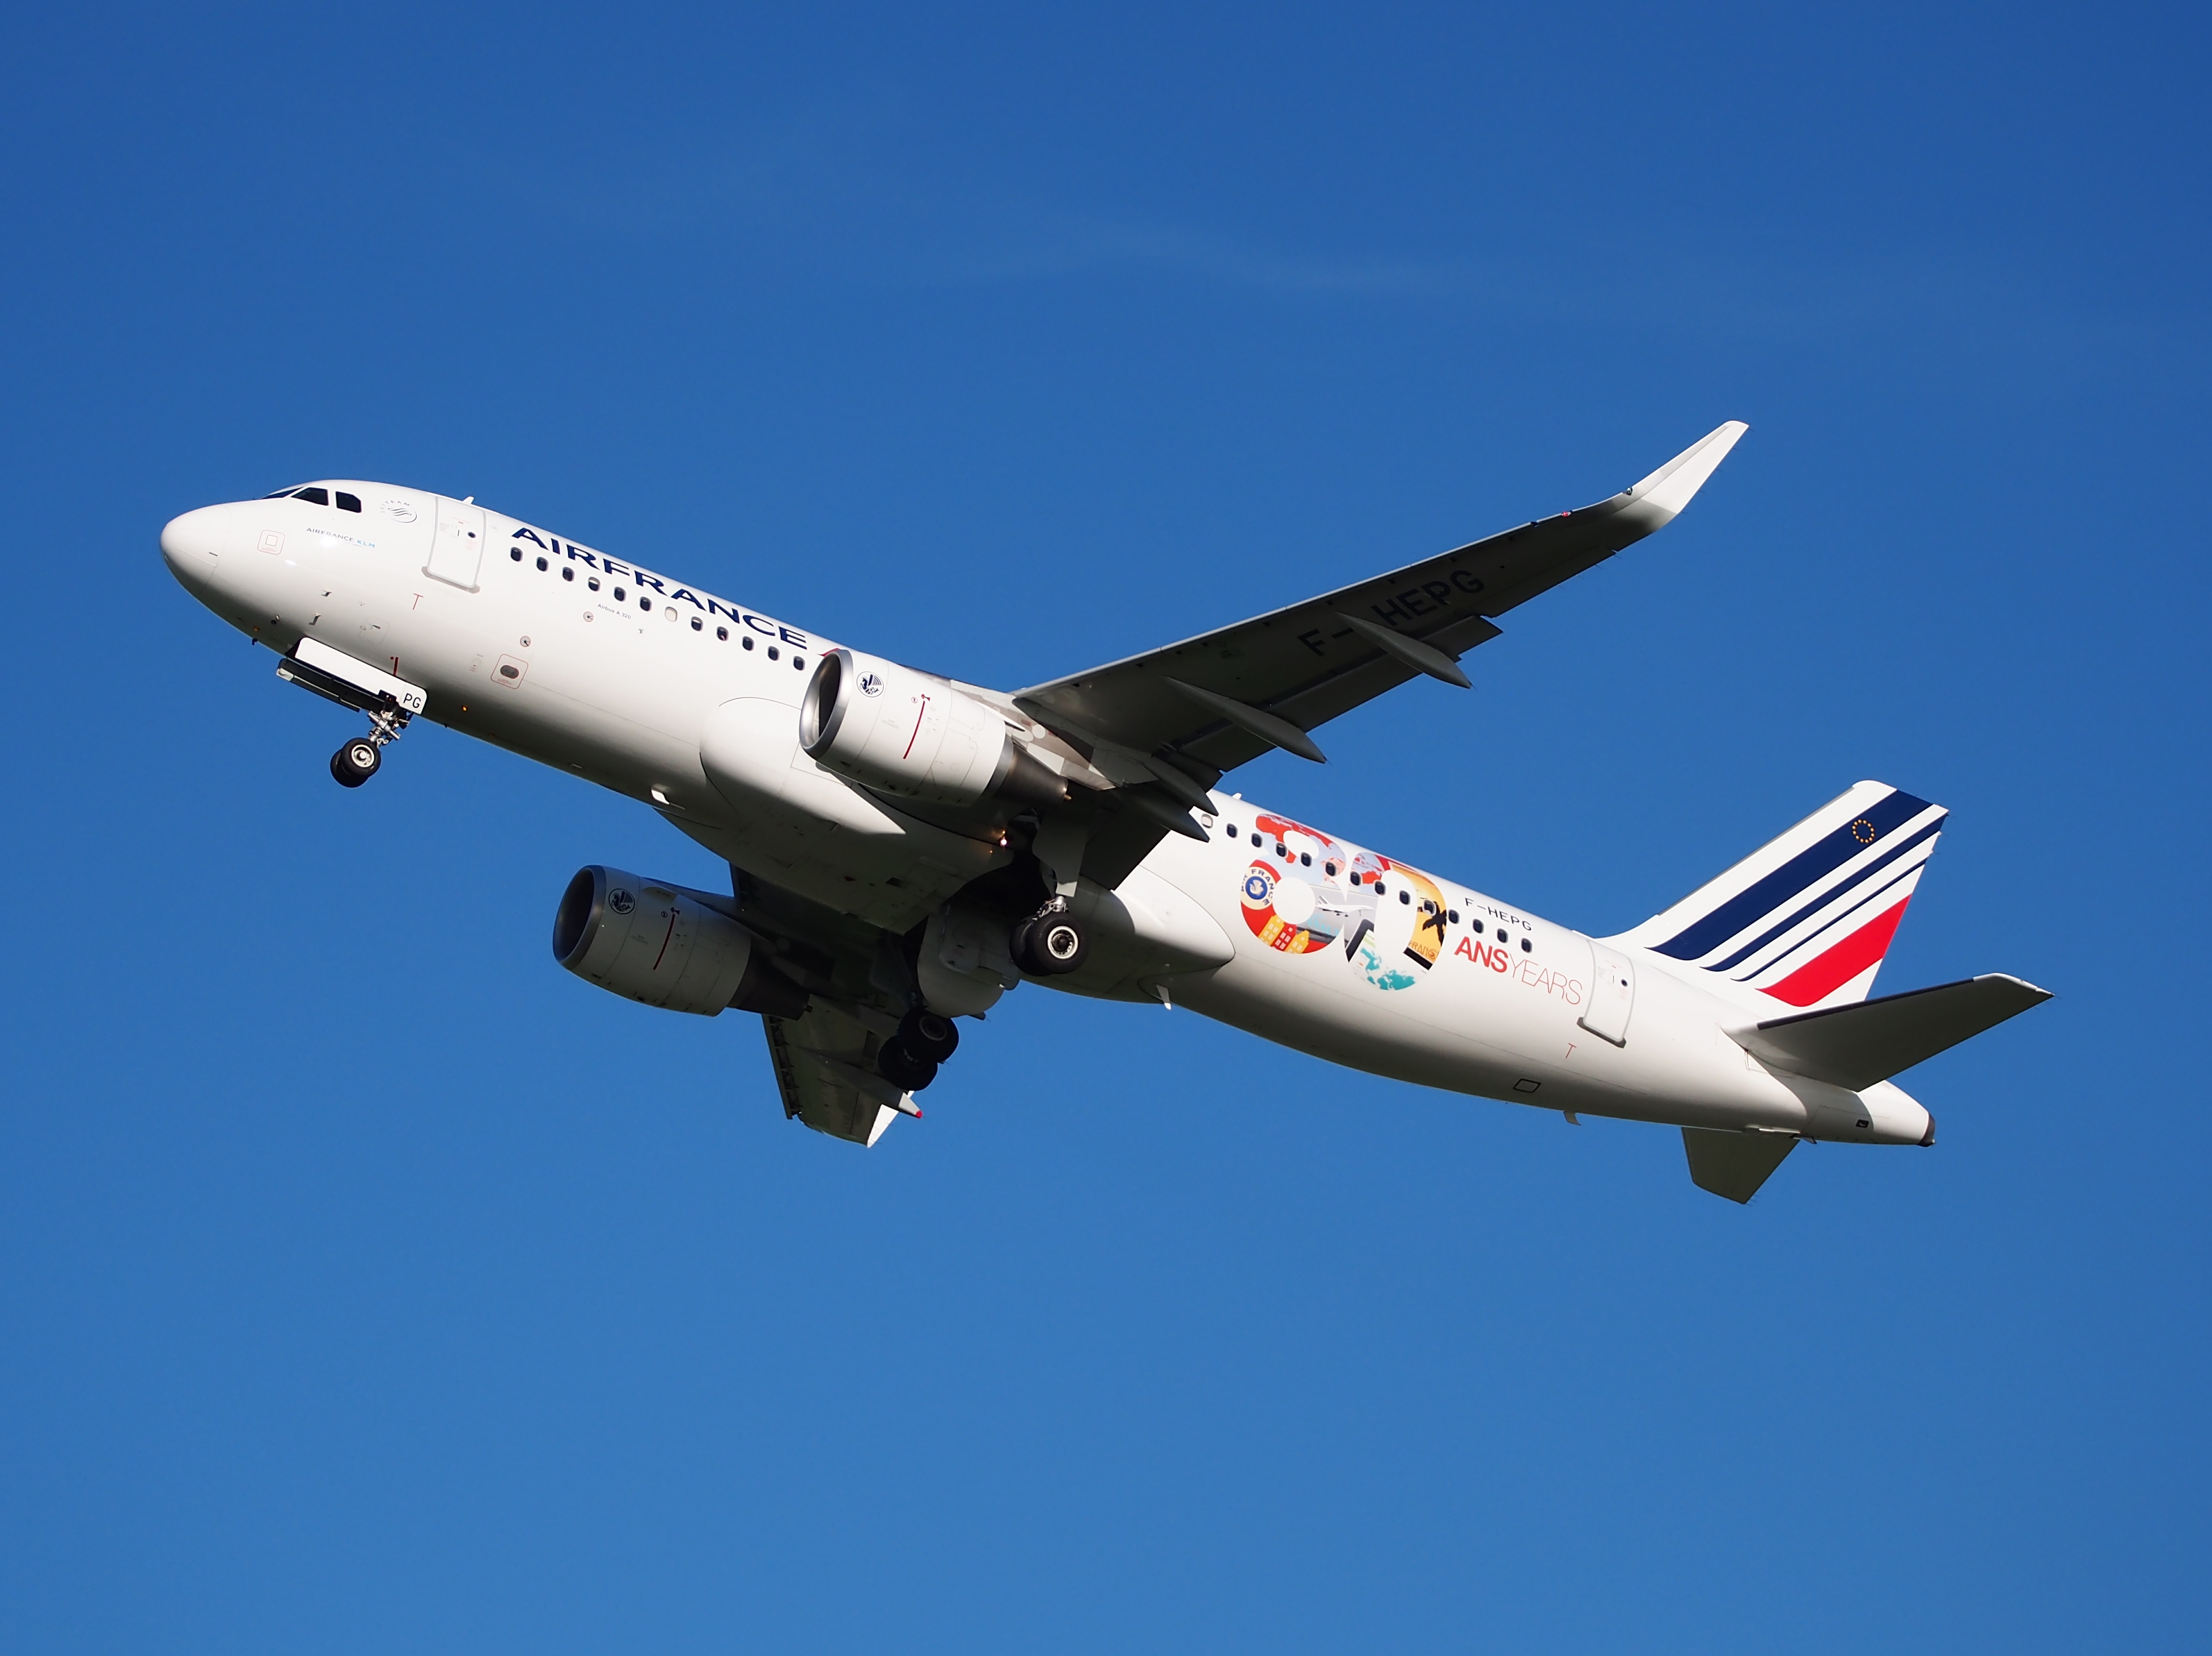 F-HEPG Air France Airbus A320-214(WL) takeoff from Schiphol (AMS - EHAM), The Netherlands, 11june2014, pic-1